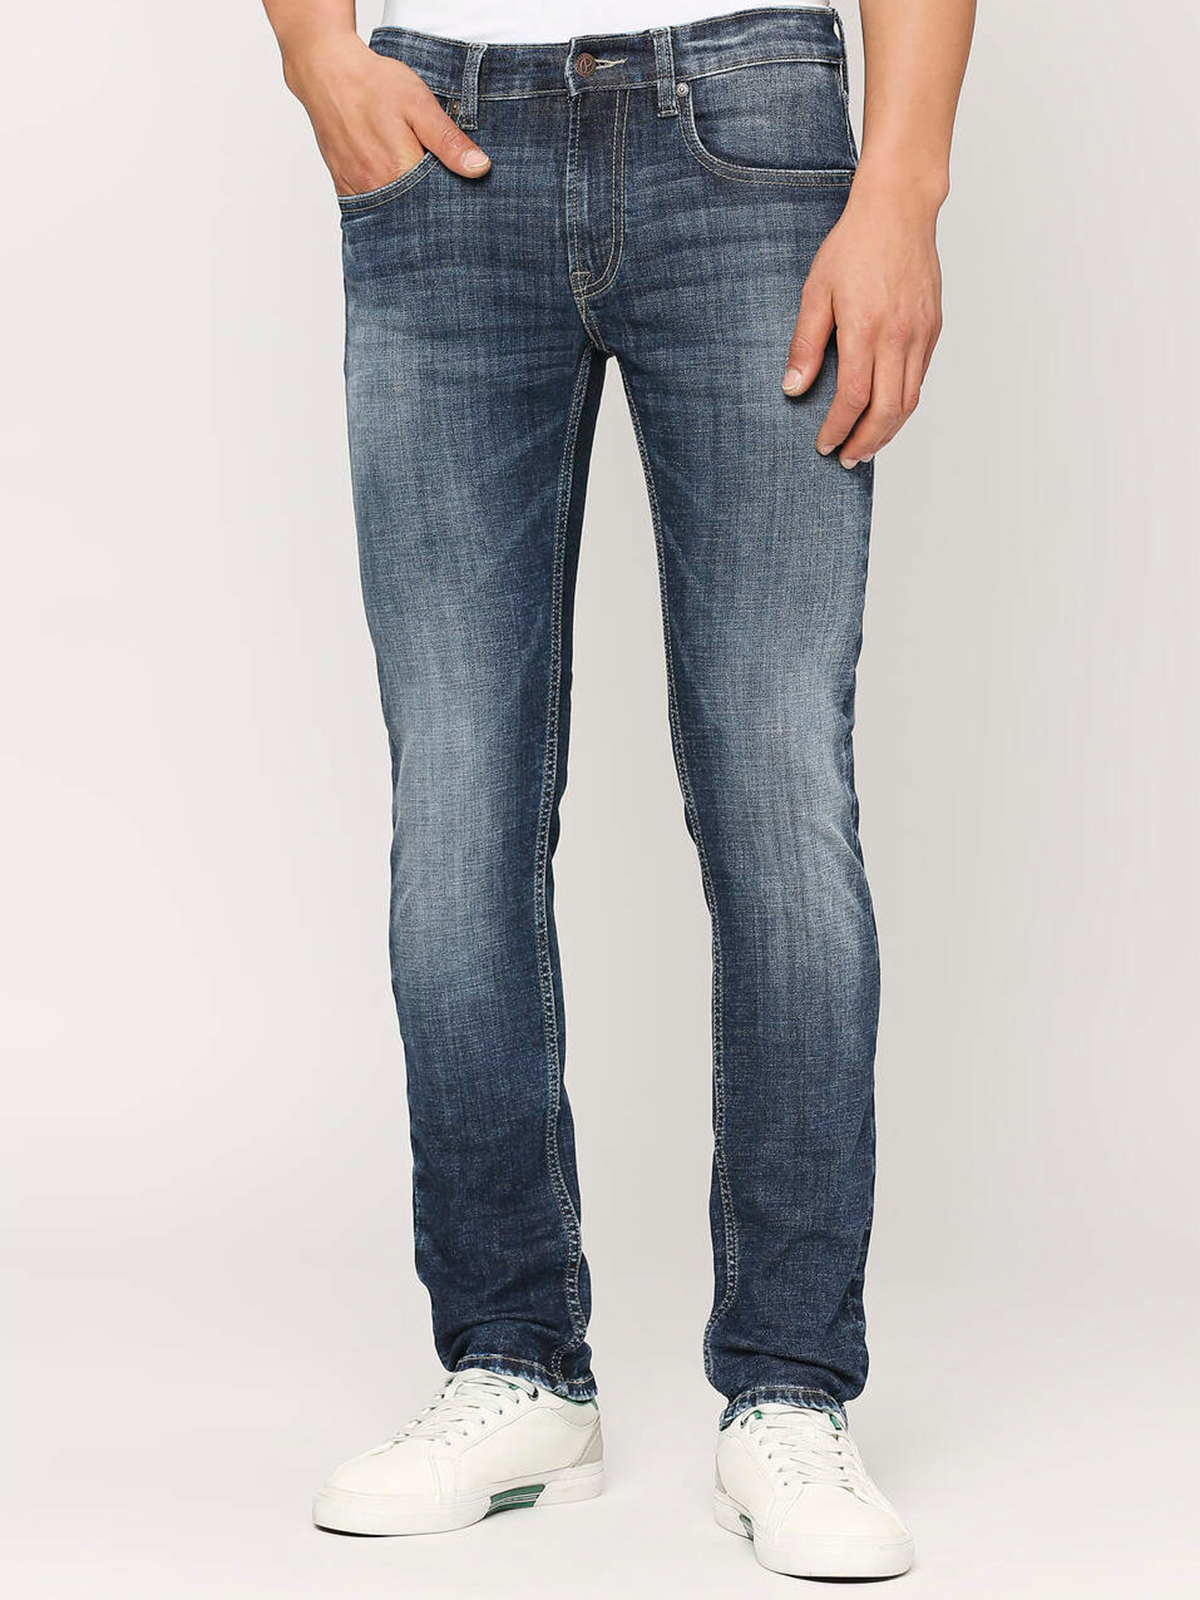 Every Pattern Every Color Mens Denim Jeans, Jeans Every Type at Rs  450/piece in Rishikesh